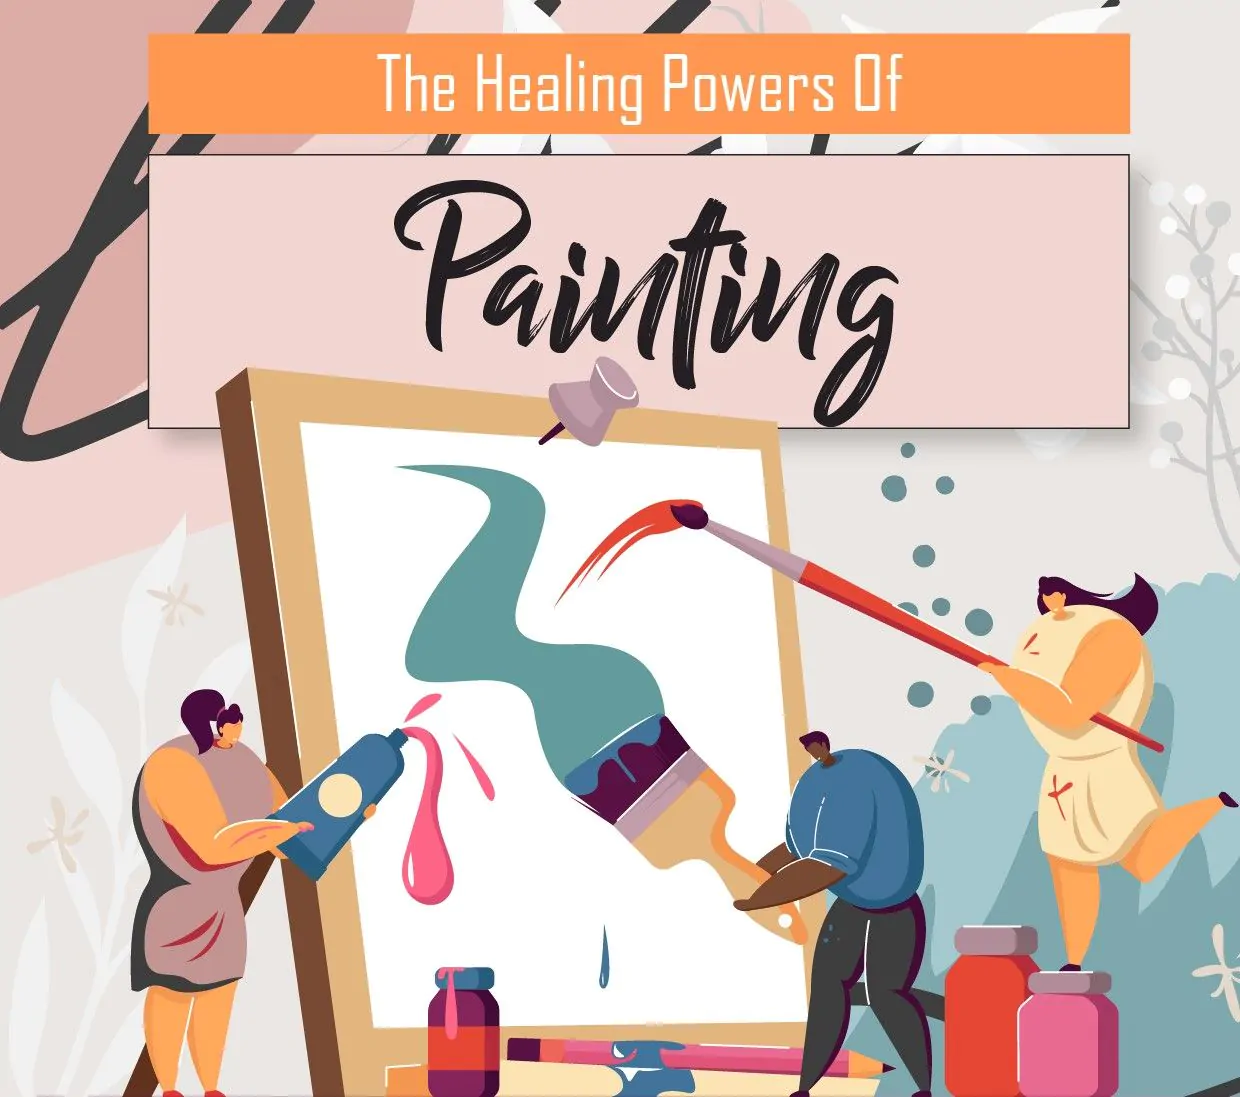 The Healing Powers Of Painting